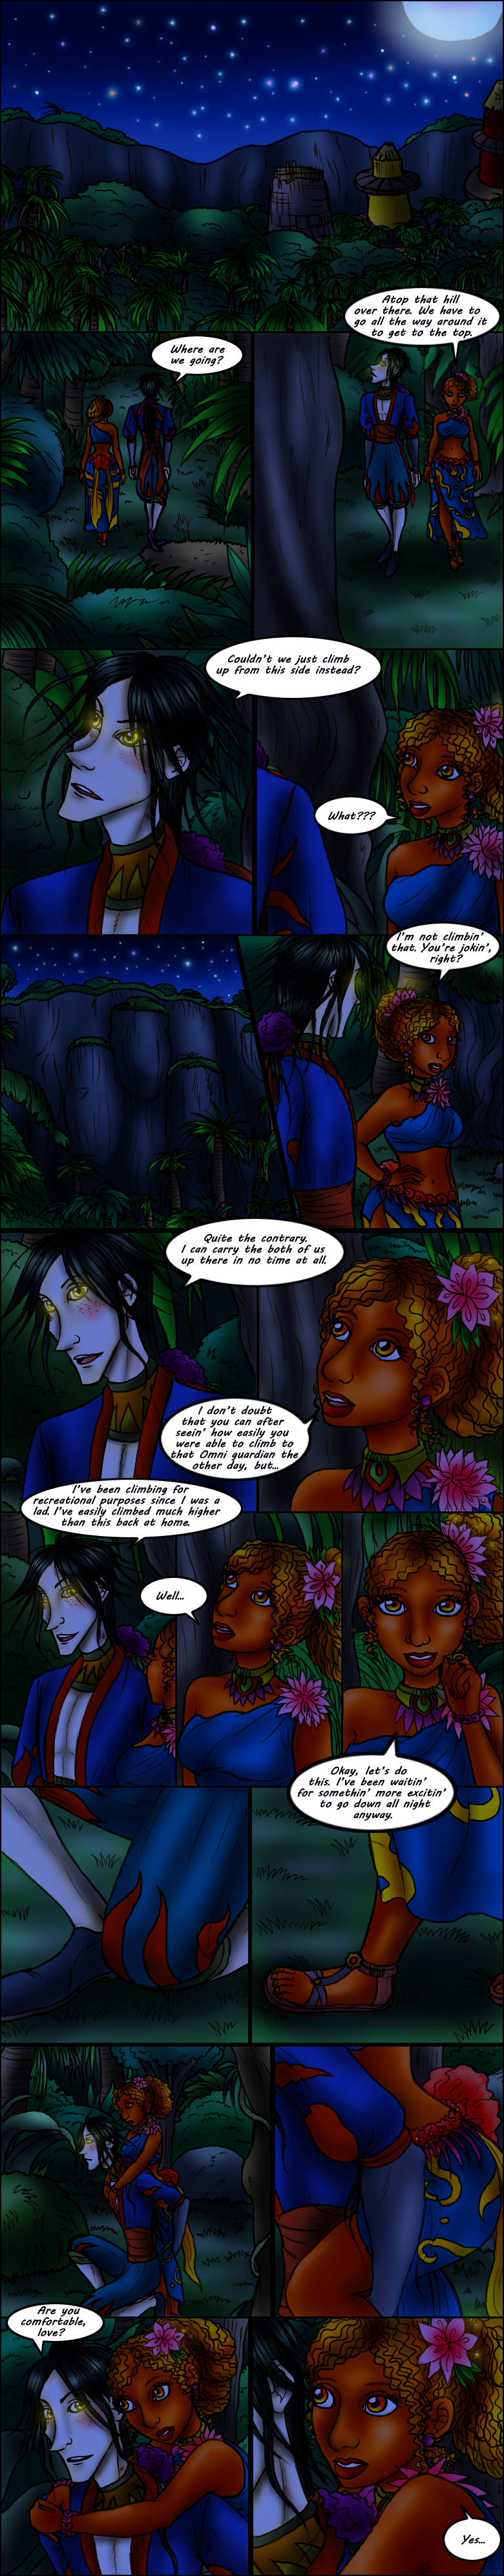 Page 70 – Climbing Up